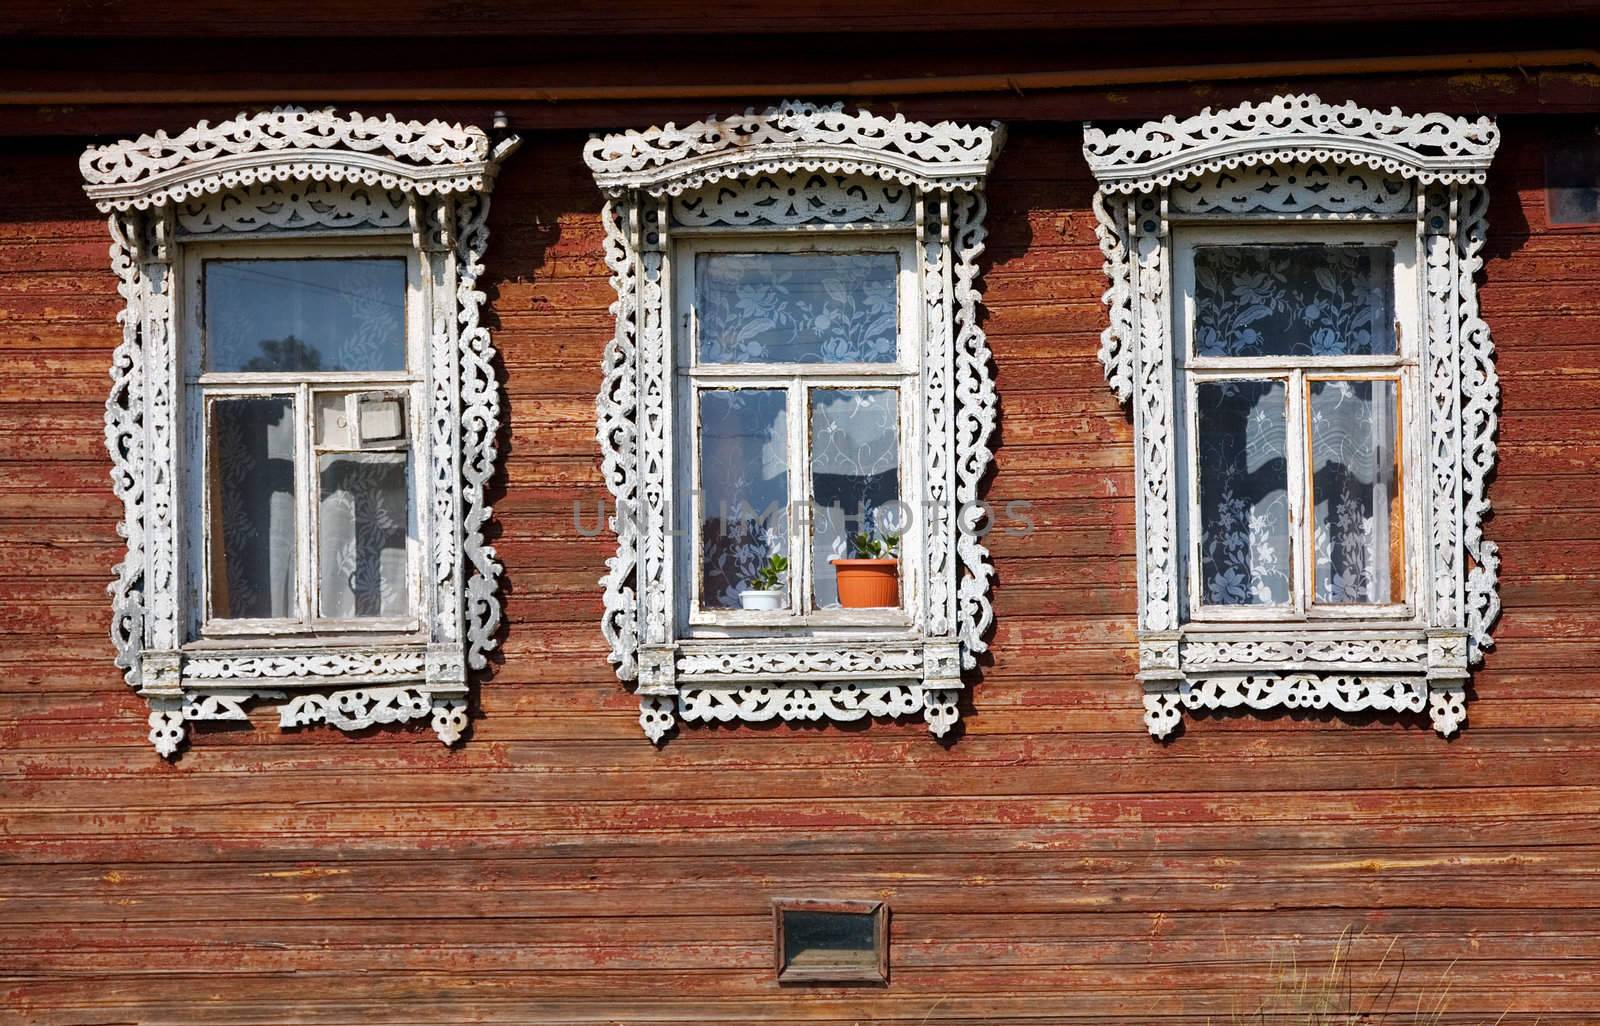 Three windows from old wooden rural wall